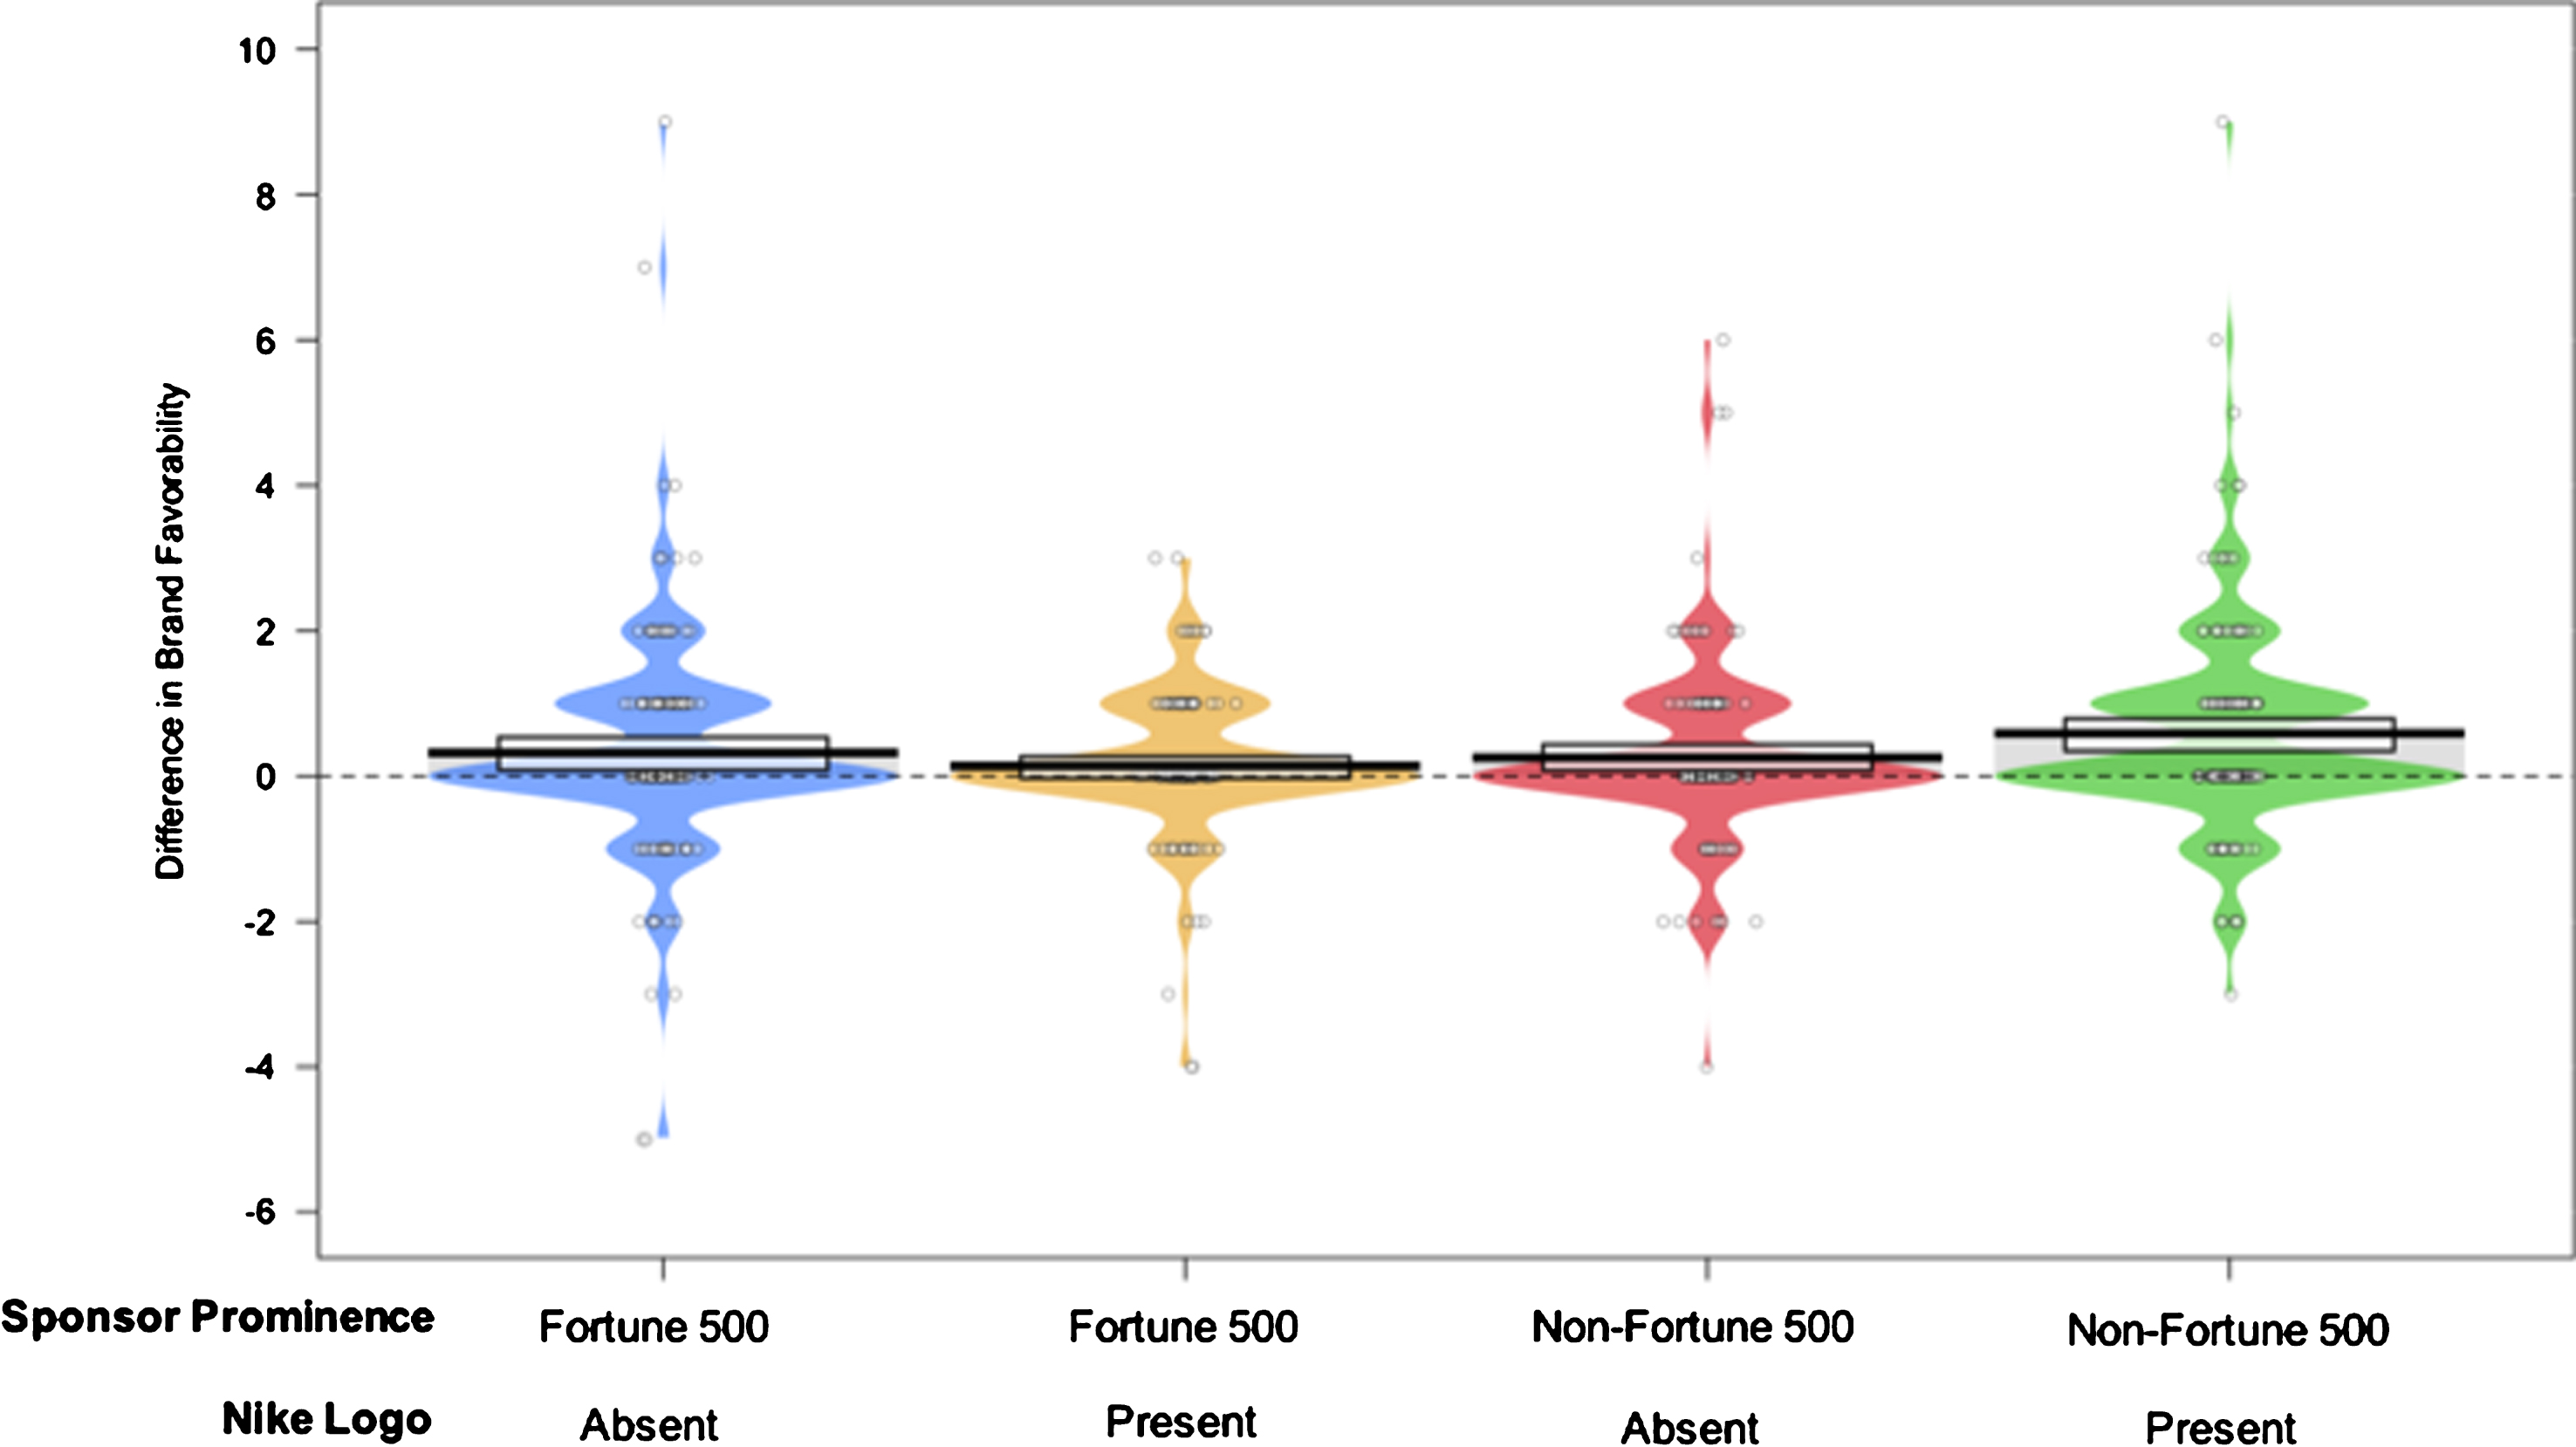 Pirateplot displaying group comparisons for differences in brand favorability.